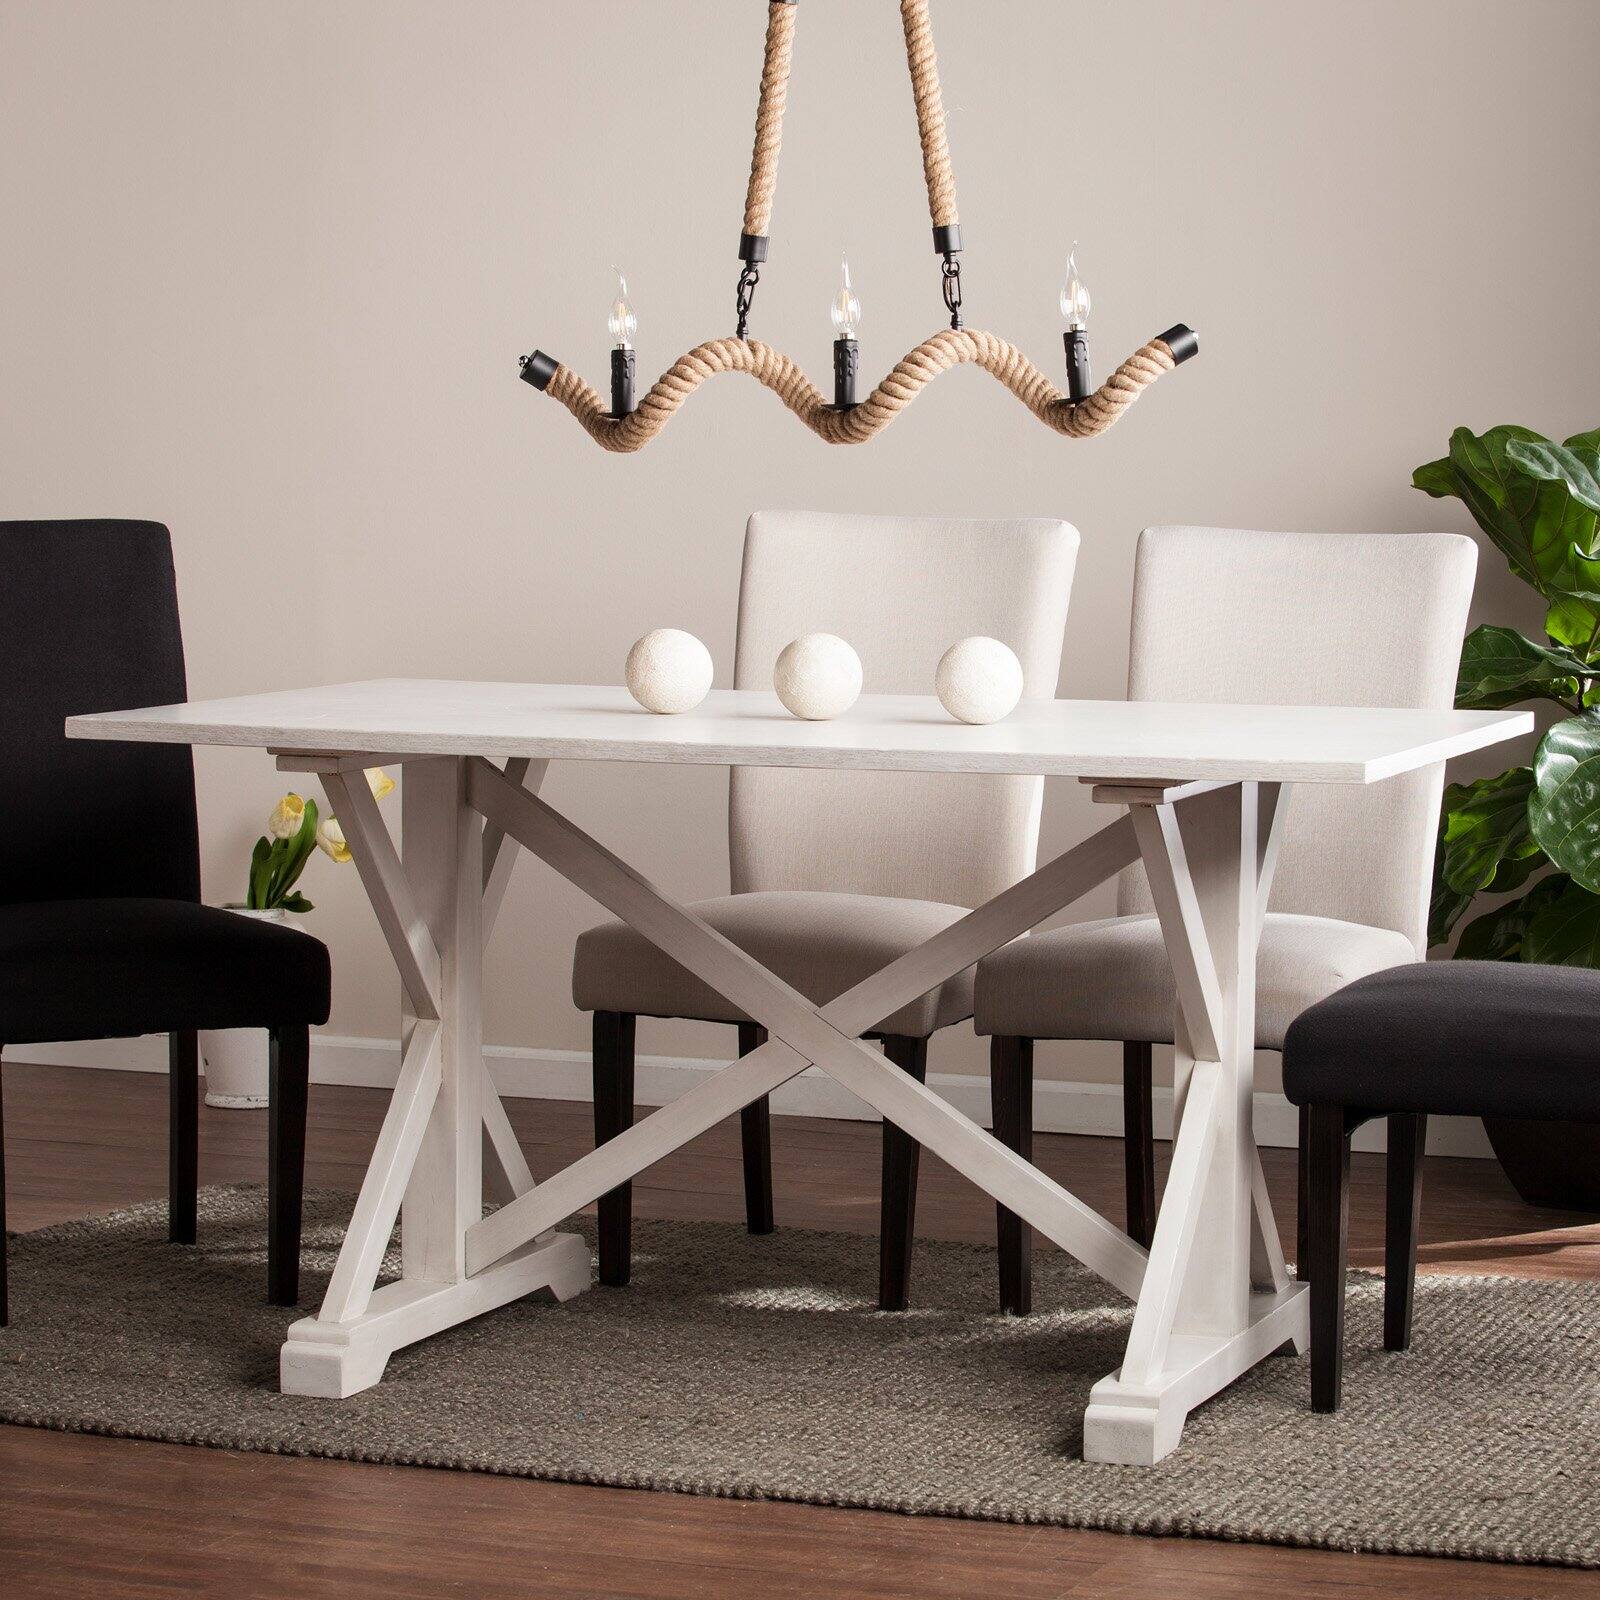 SEI Furniture Cardwell Farmhouse Dining Table in White - image 1 of 8